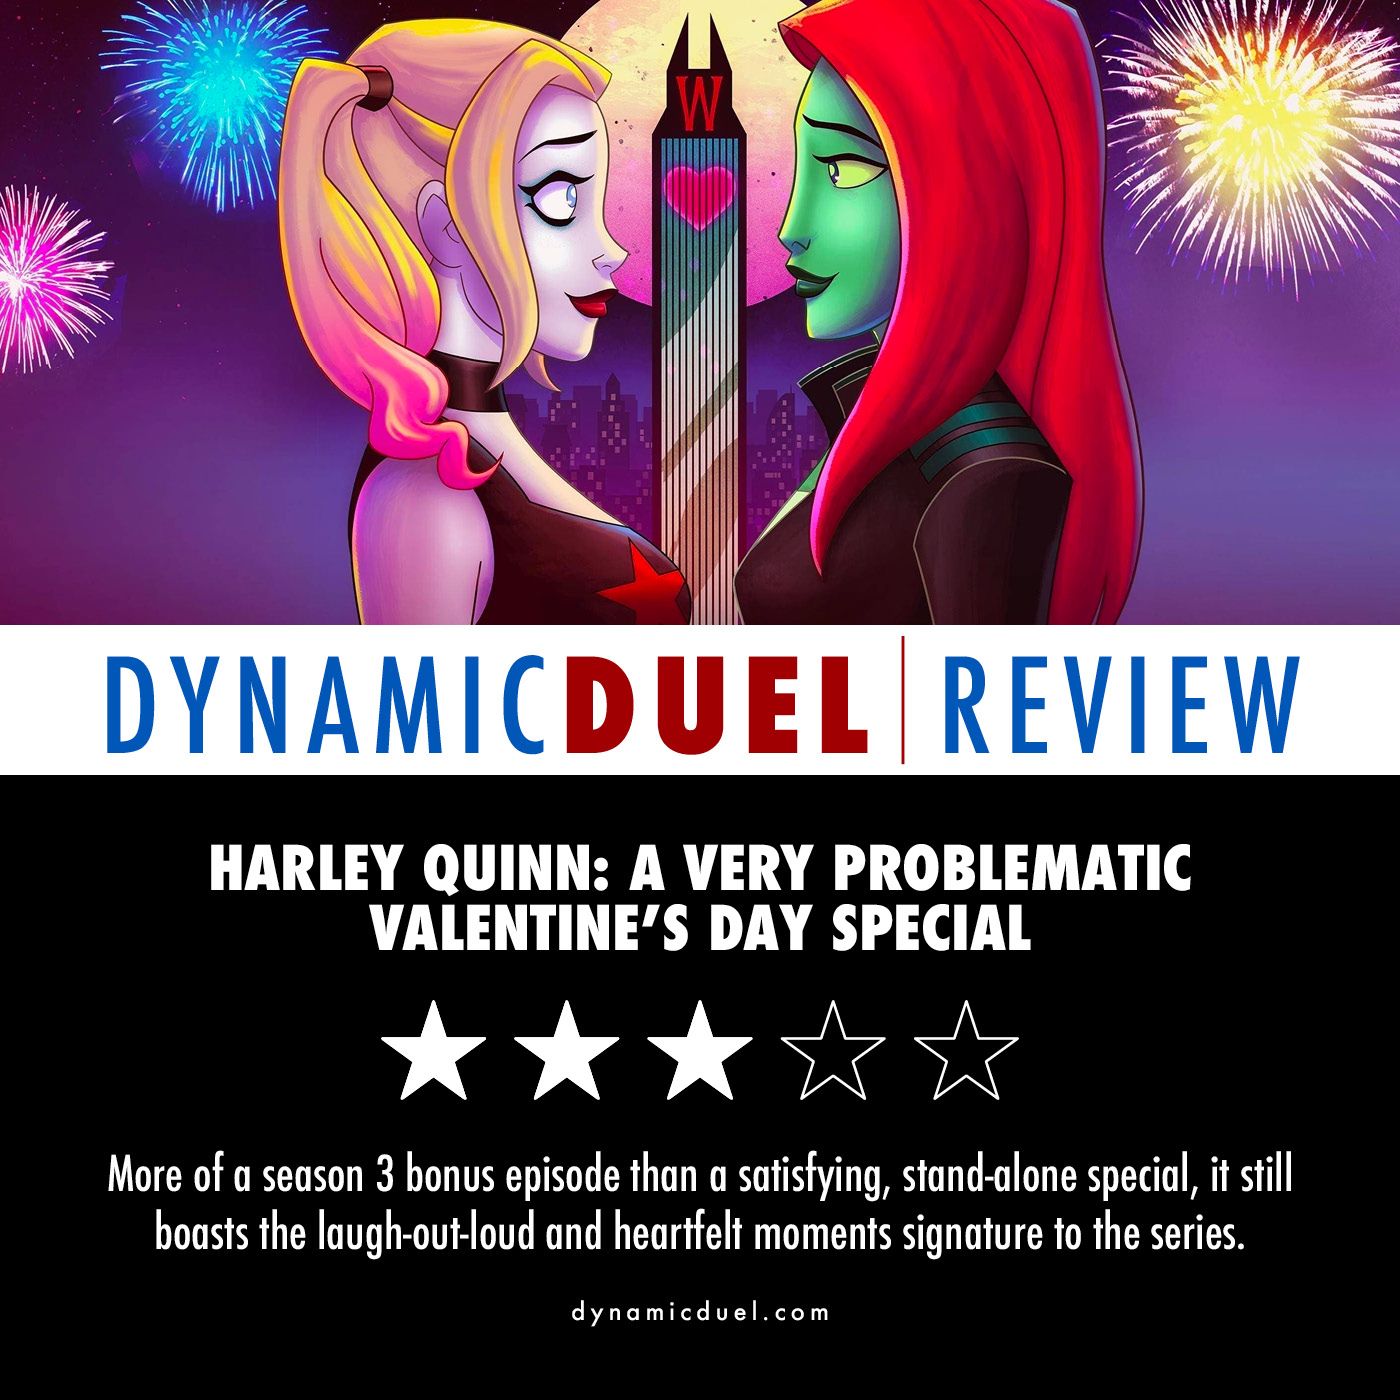 Harley Quinn: A Very Problematic Valentine's Day Special Review